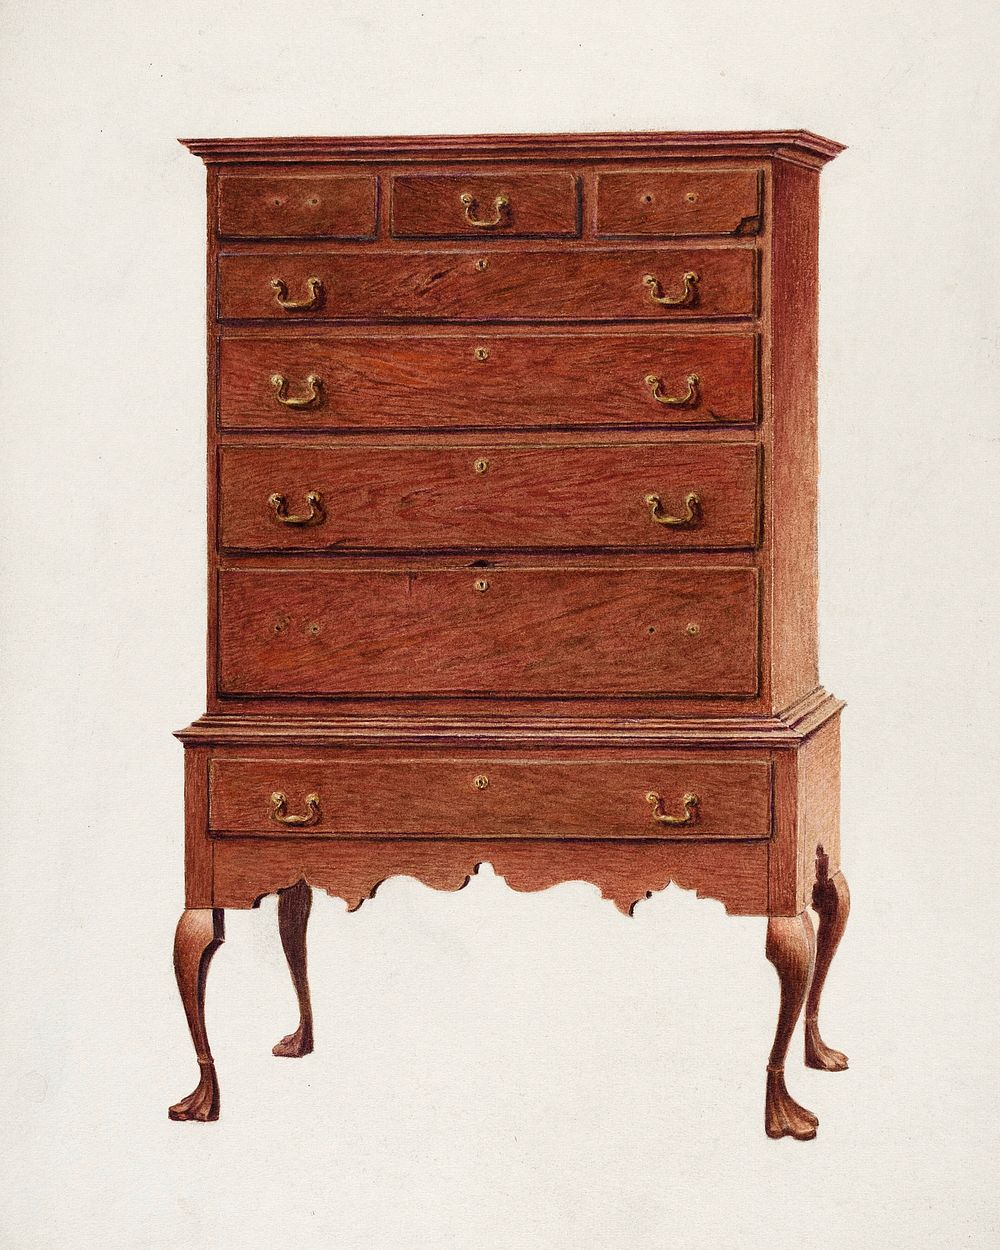 Early American highboy (1935/1942) by Ralph Boyer. Original from The National Gallery of Art. Digitally enhanced by rawpixel.